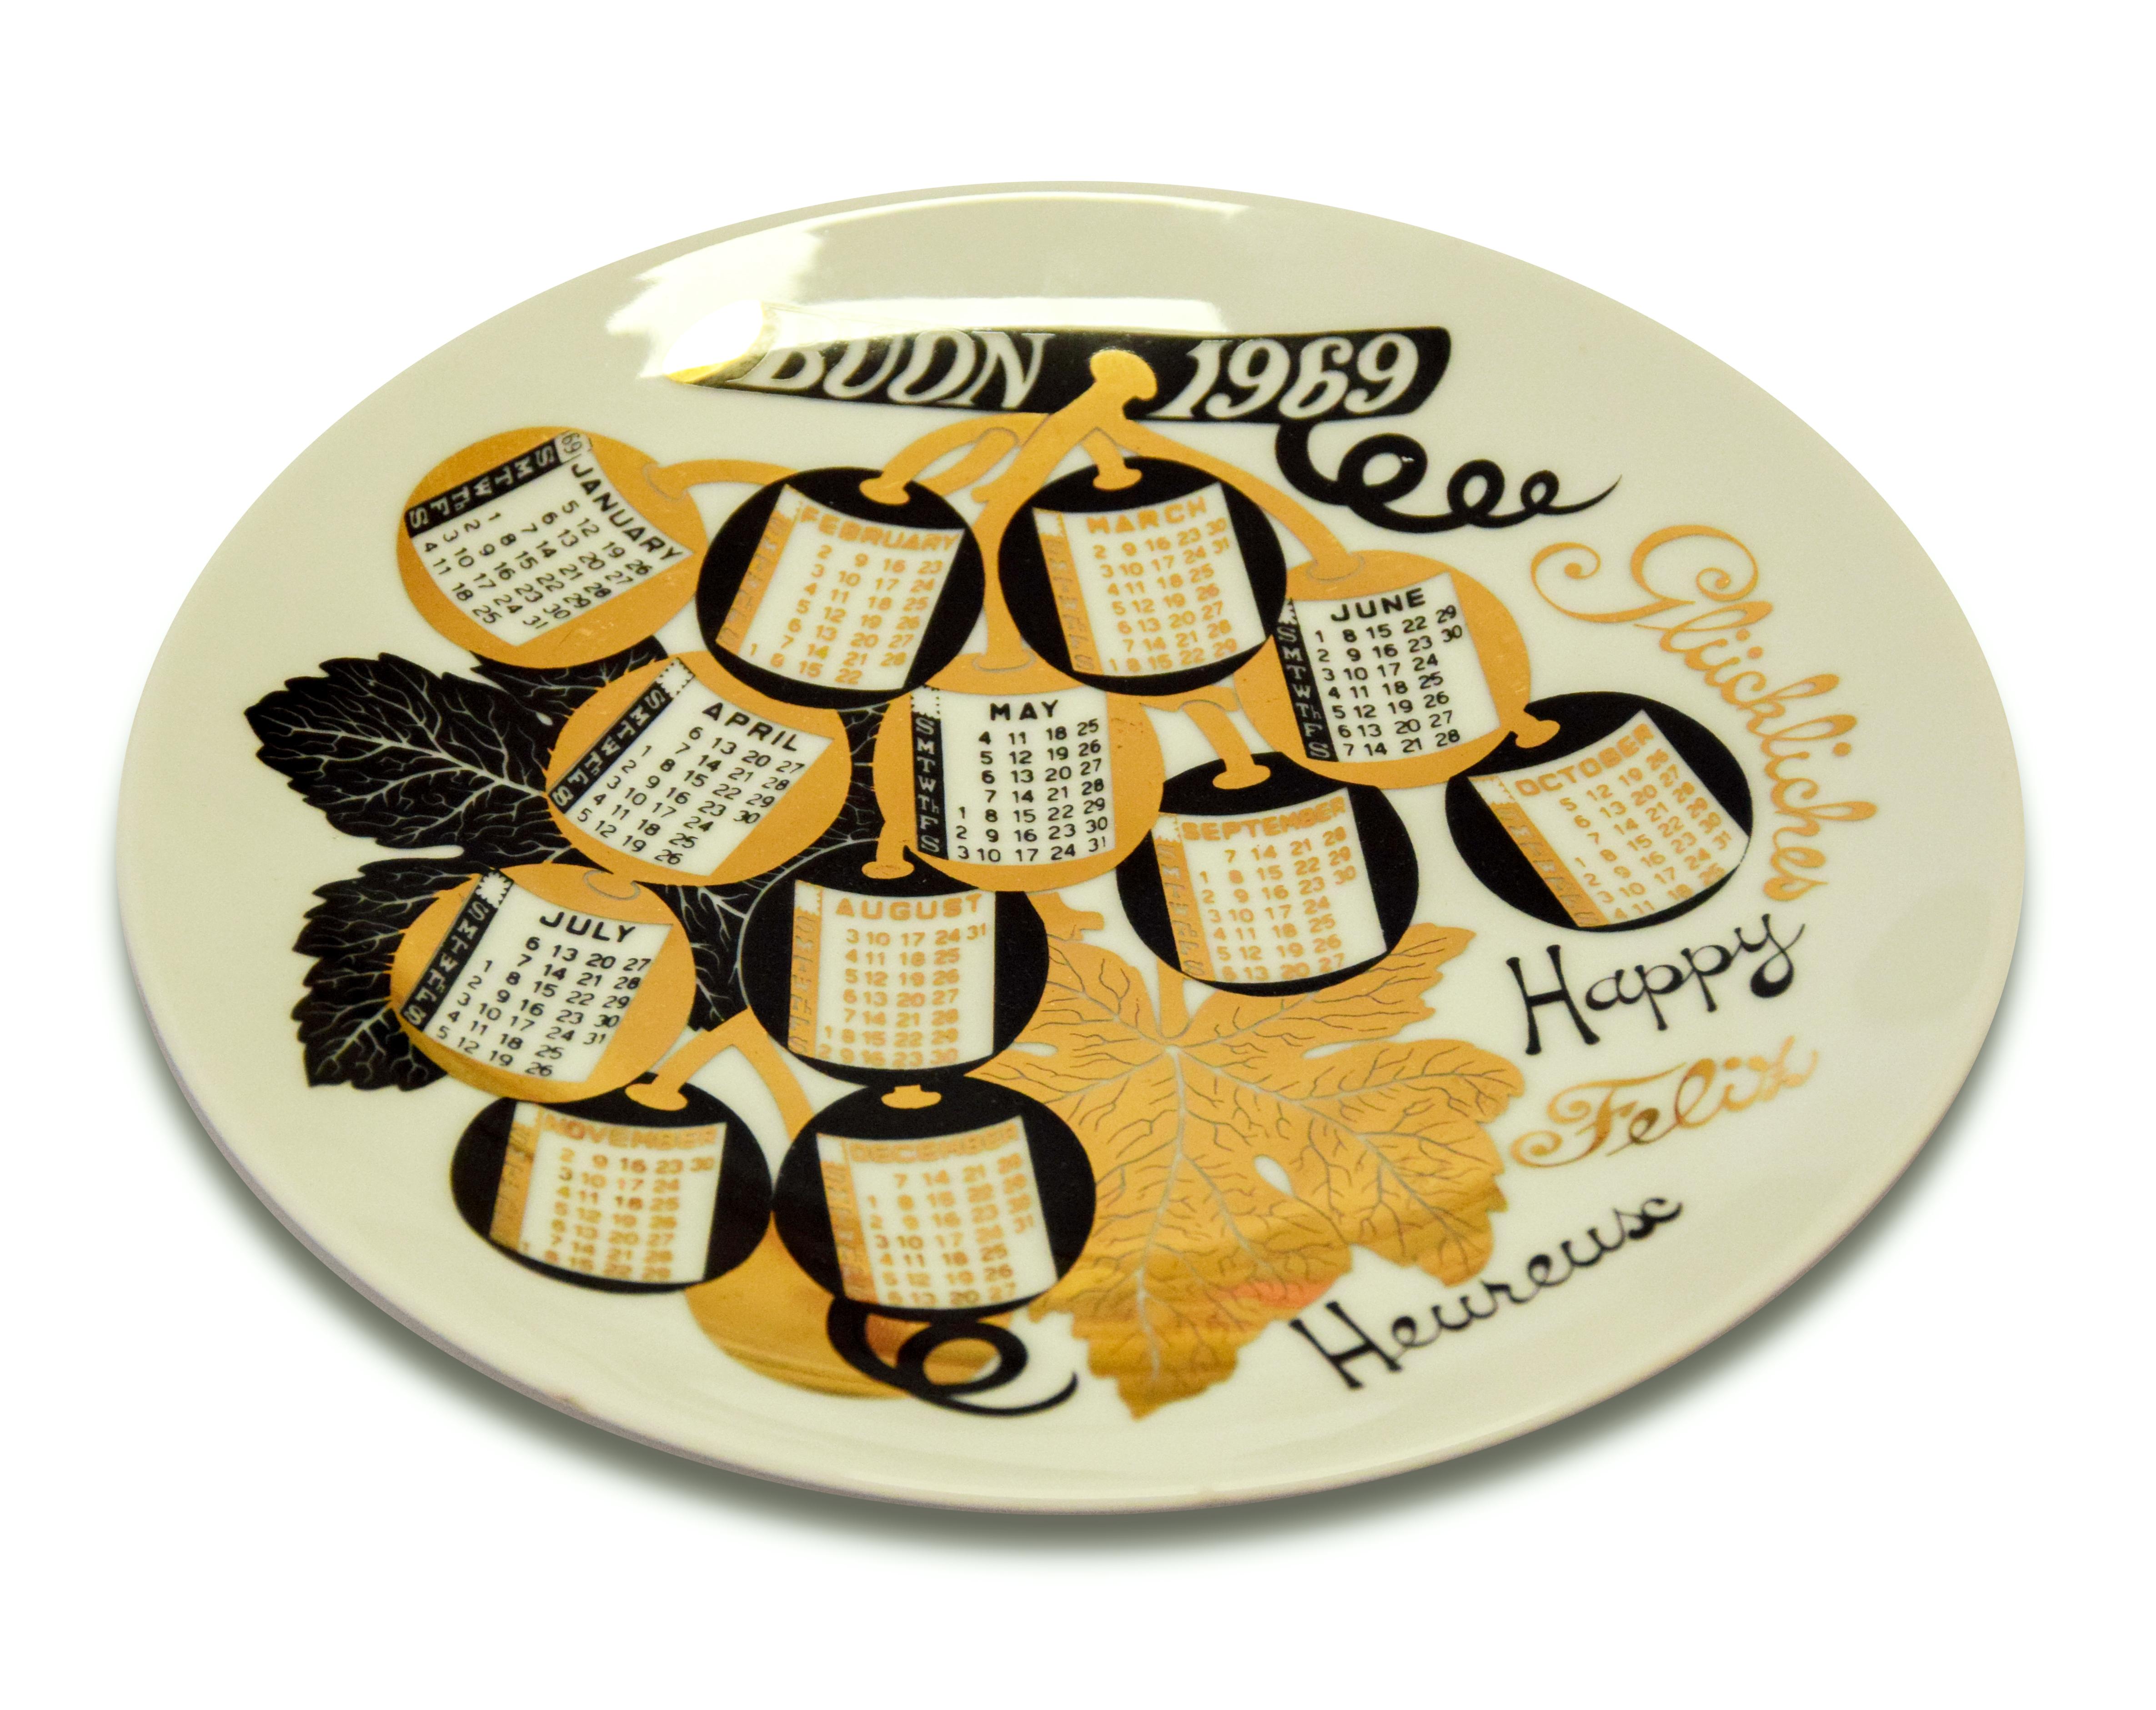 Buon 1969 - Calendario is a silk-screened porcelain plate, designed by the Italian artist Piero Fornasetti in 1969.

From the Calendario series, the Happy New Year plates series. 

Very good conditions, except for some imperceptible signs of the